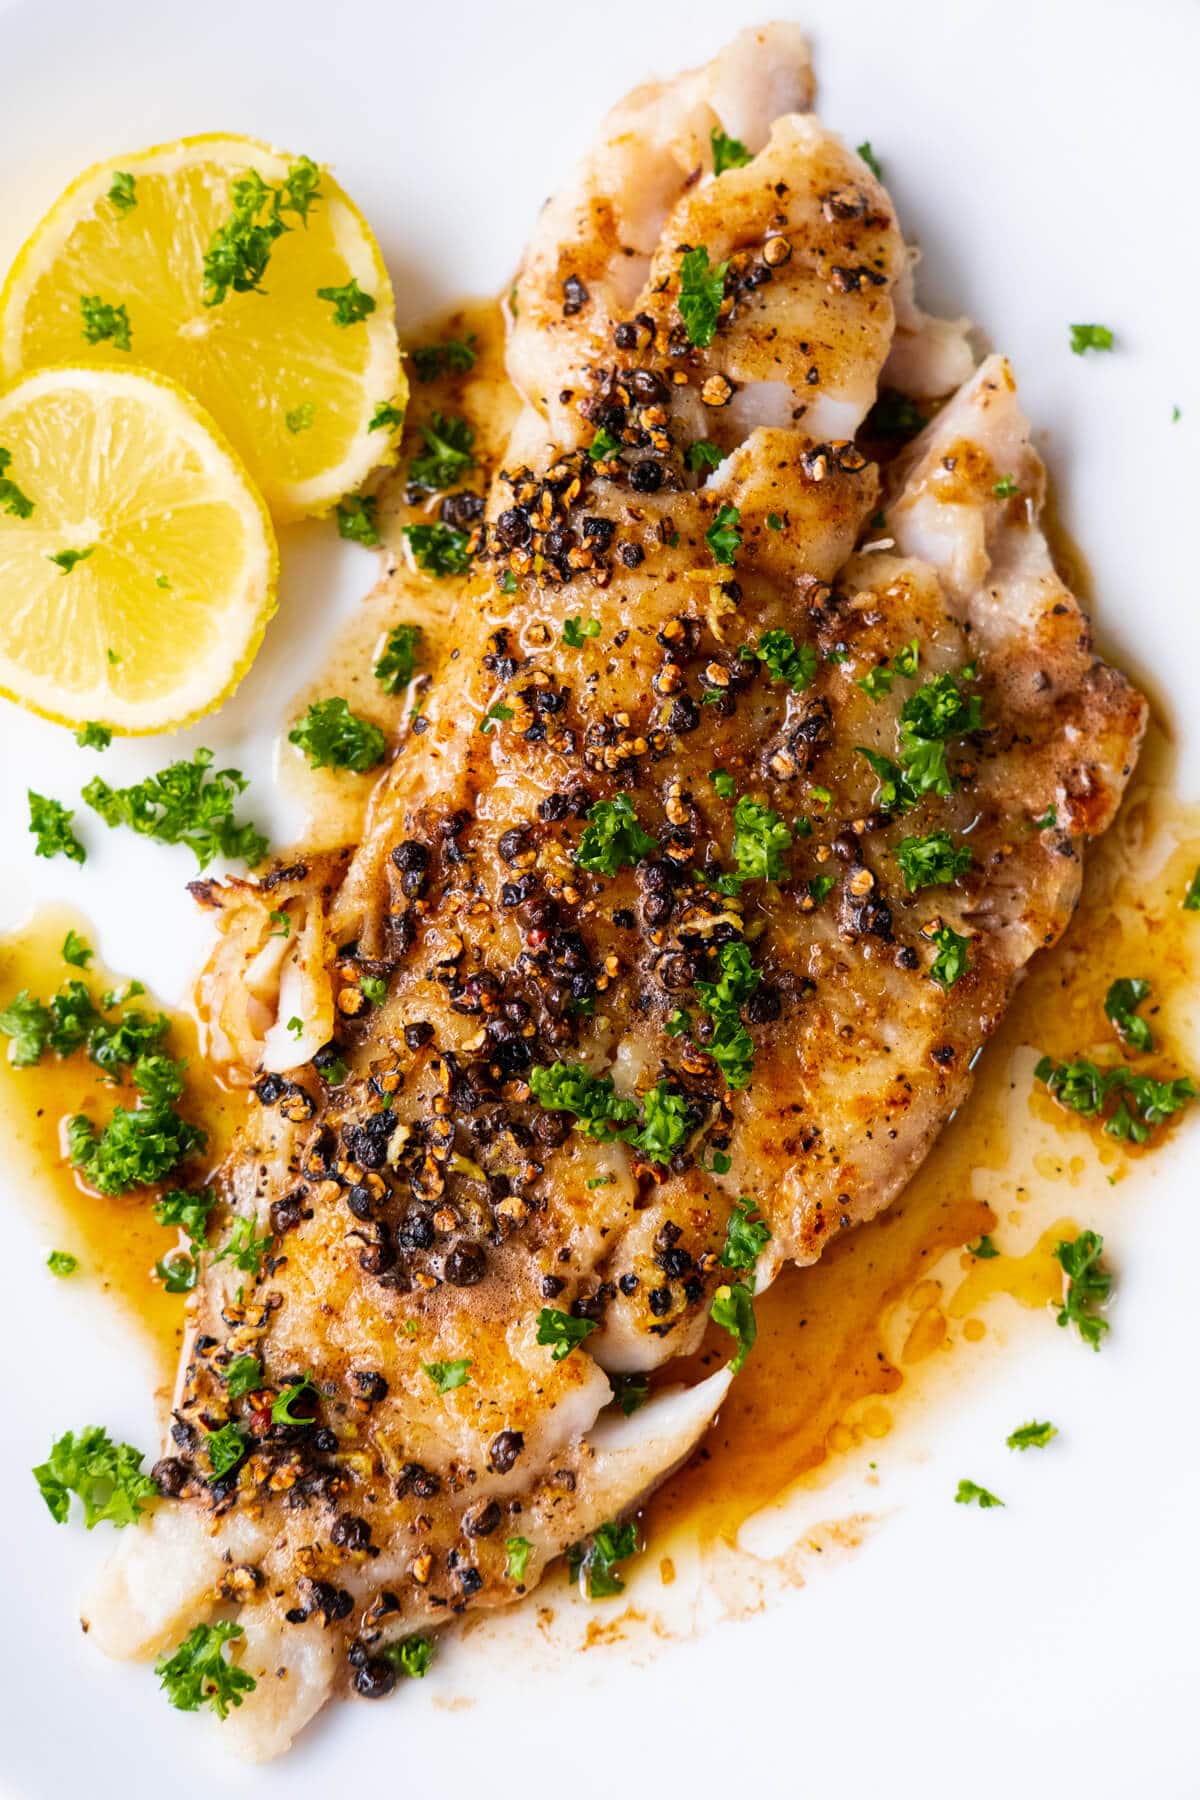 Pan-seared flounder fillet with buttery black pepper sauce and sprinkled with chopped parsley on top, alongside lemon slices. 